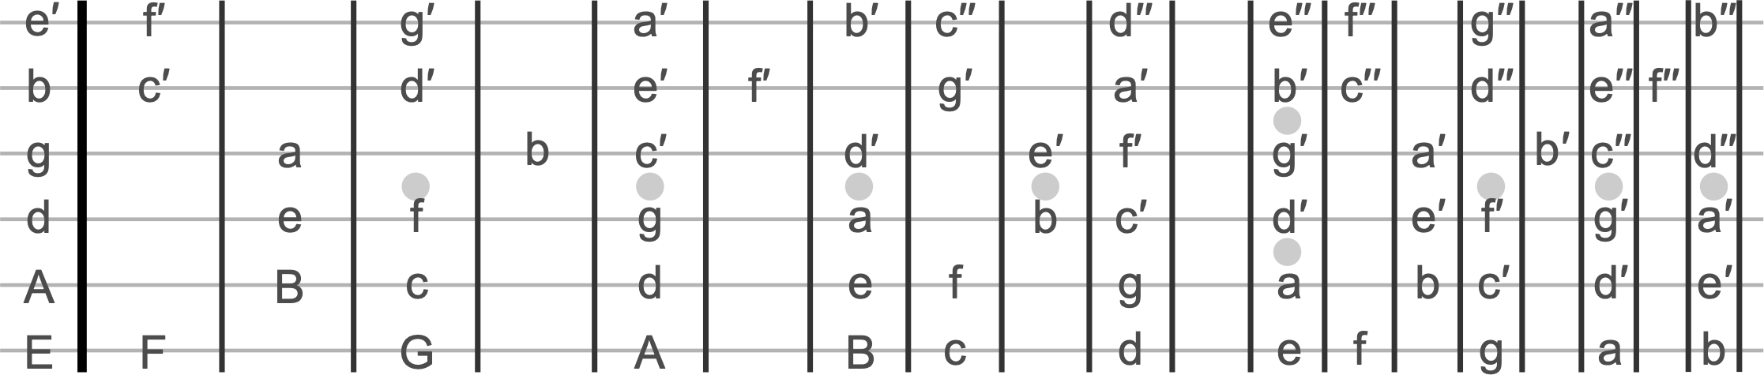 Fretboard with note names